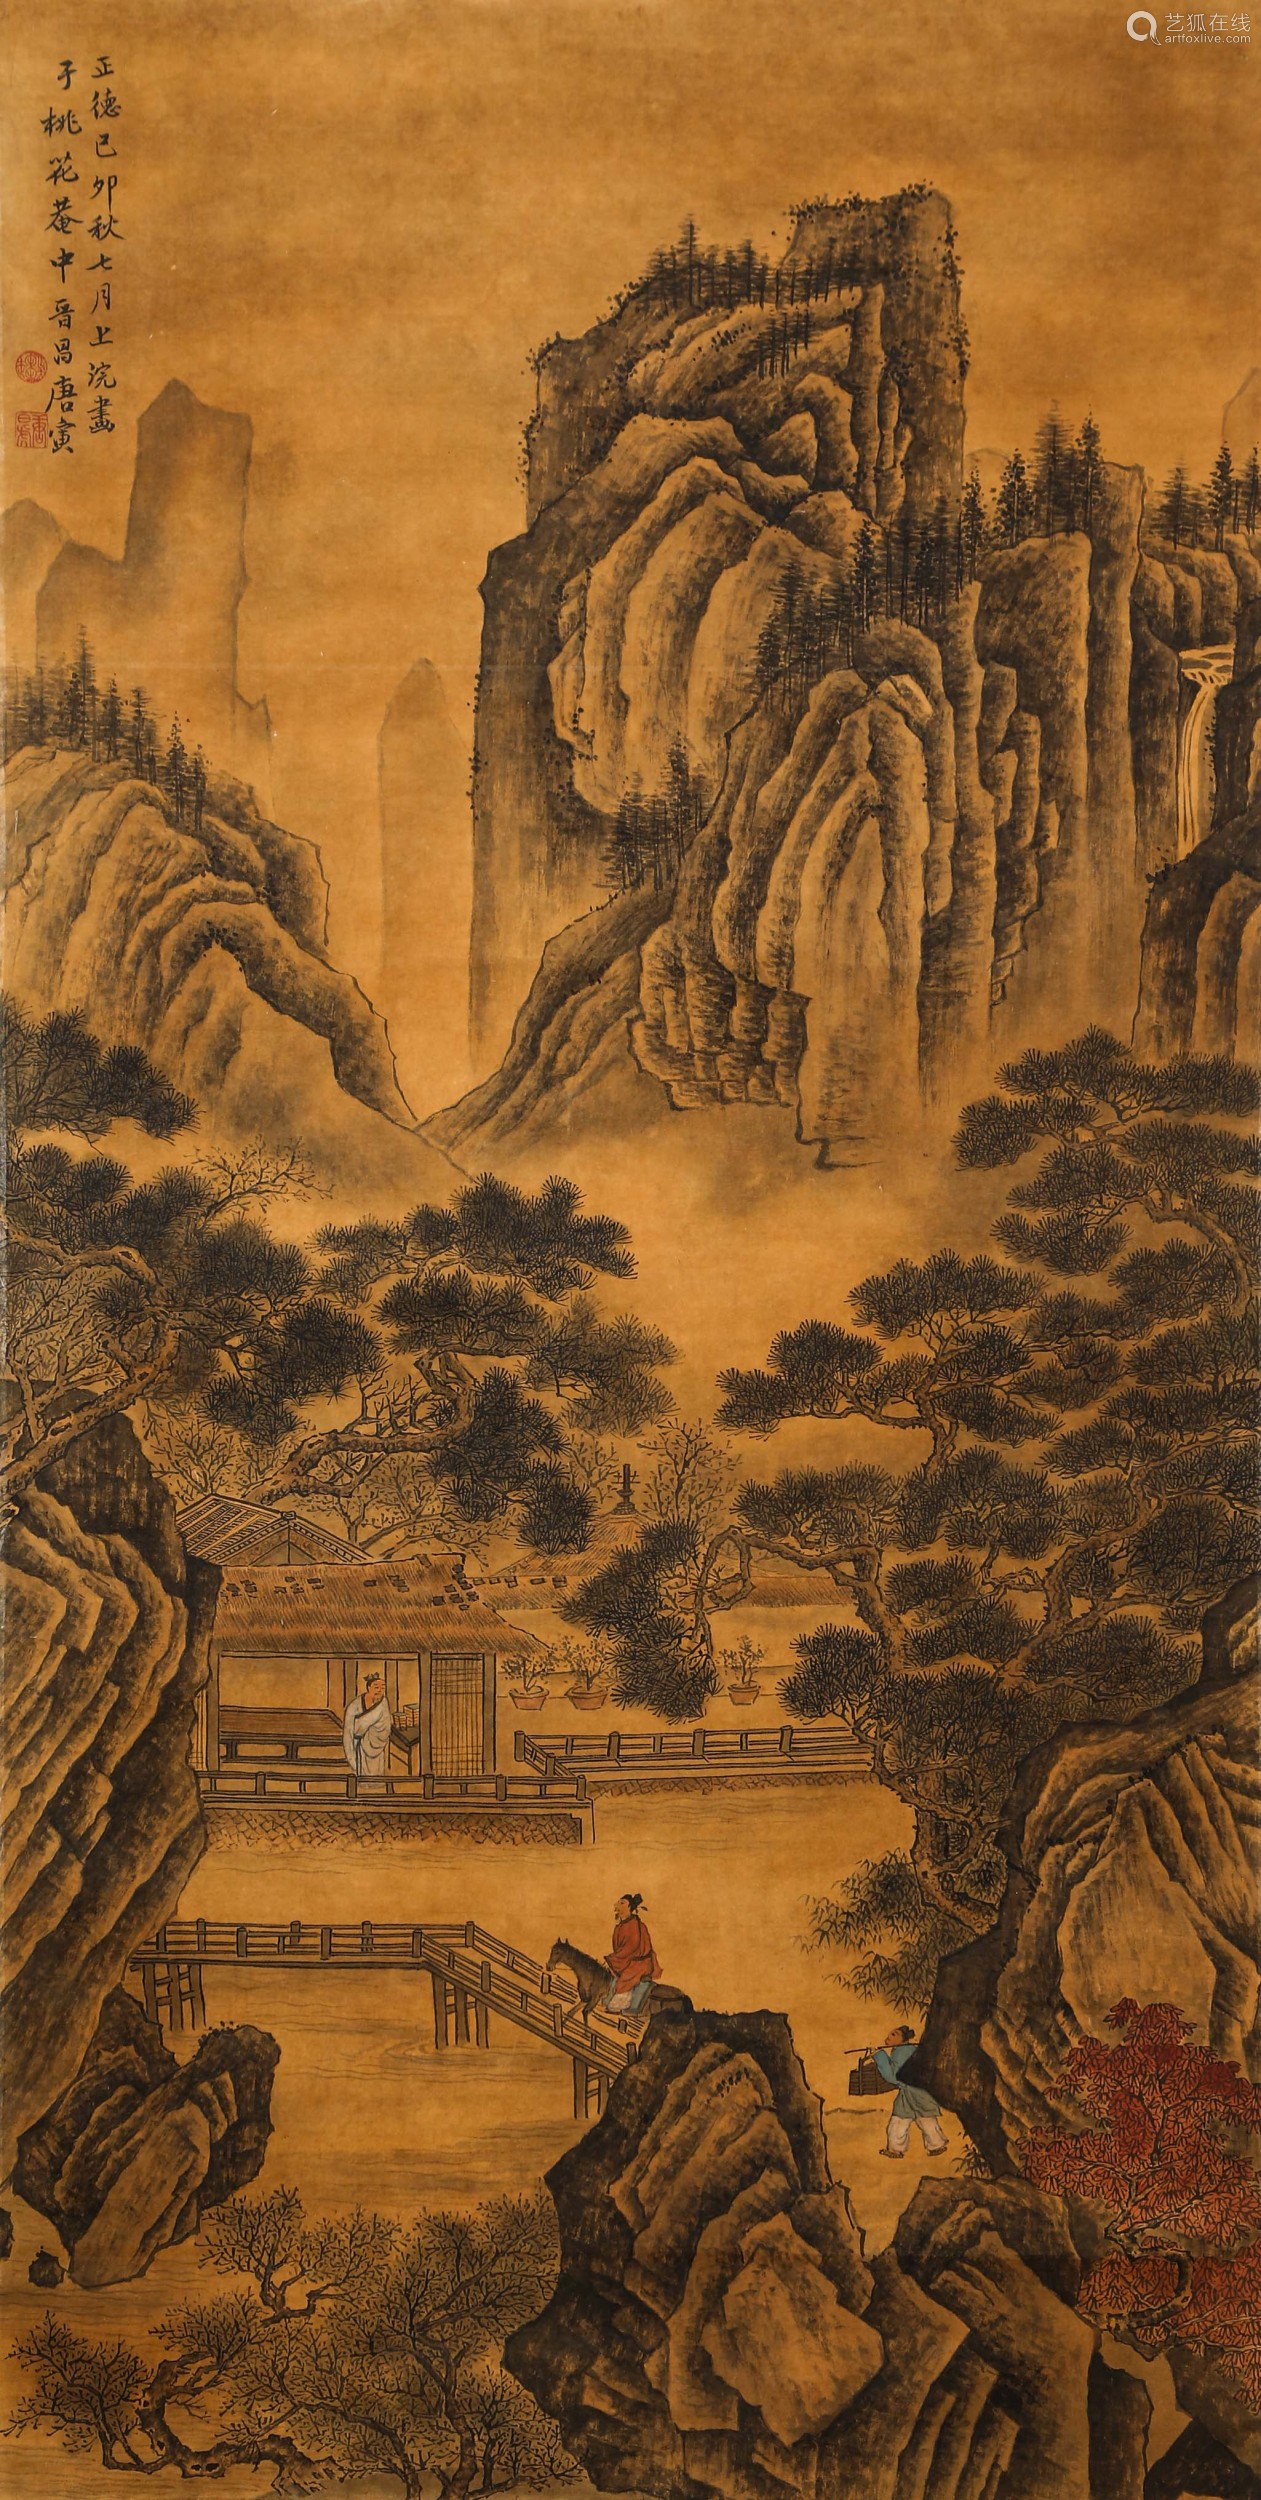 Chinese ink painting,
Tang Yin's Landscape Paintings